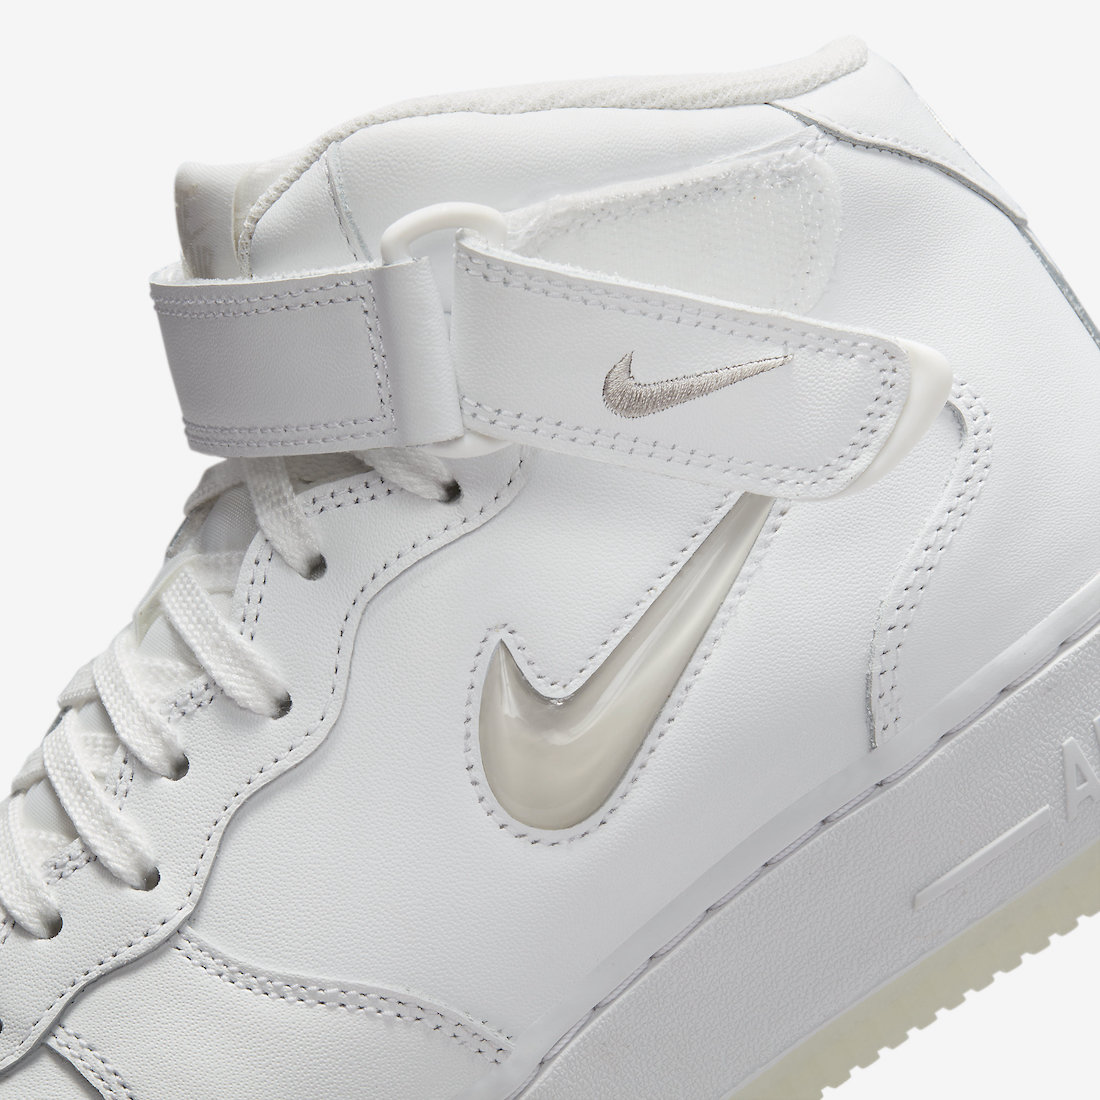 Nike Air Force 1 Mid Jewel Summit White DZ2672-101 Release Date | SBD